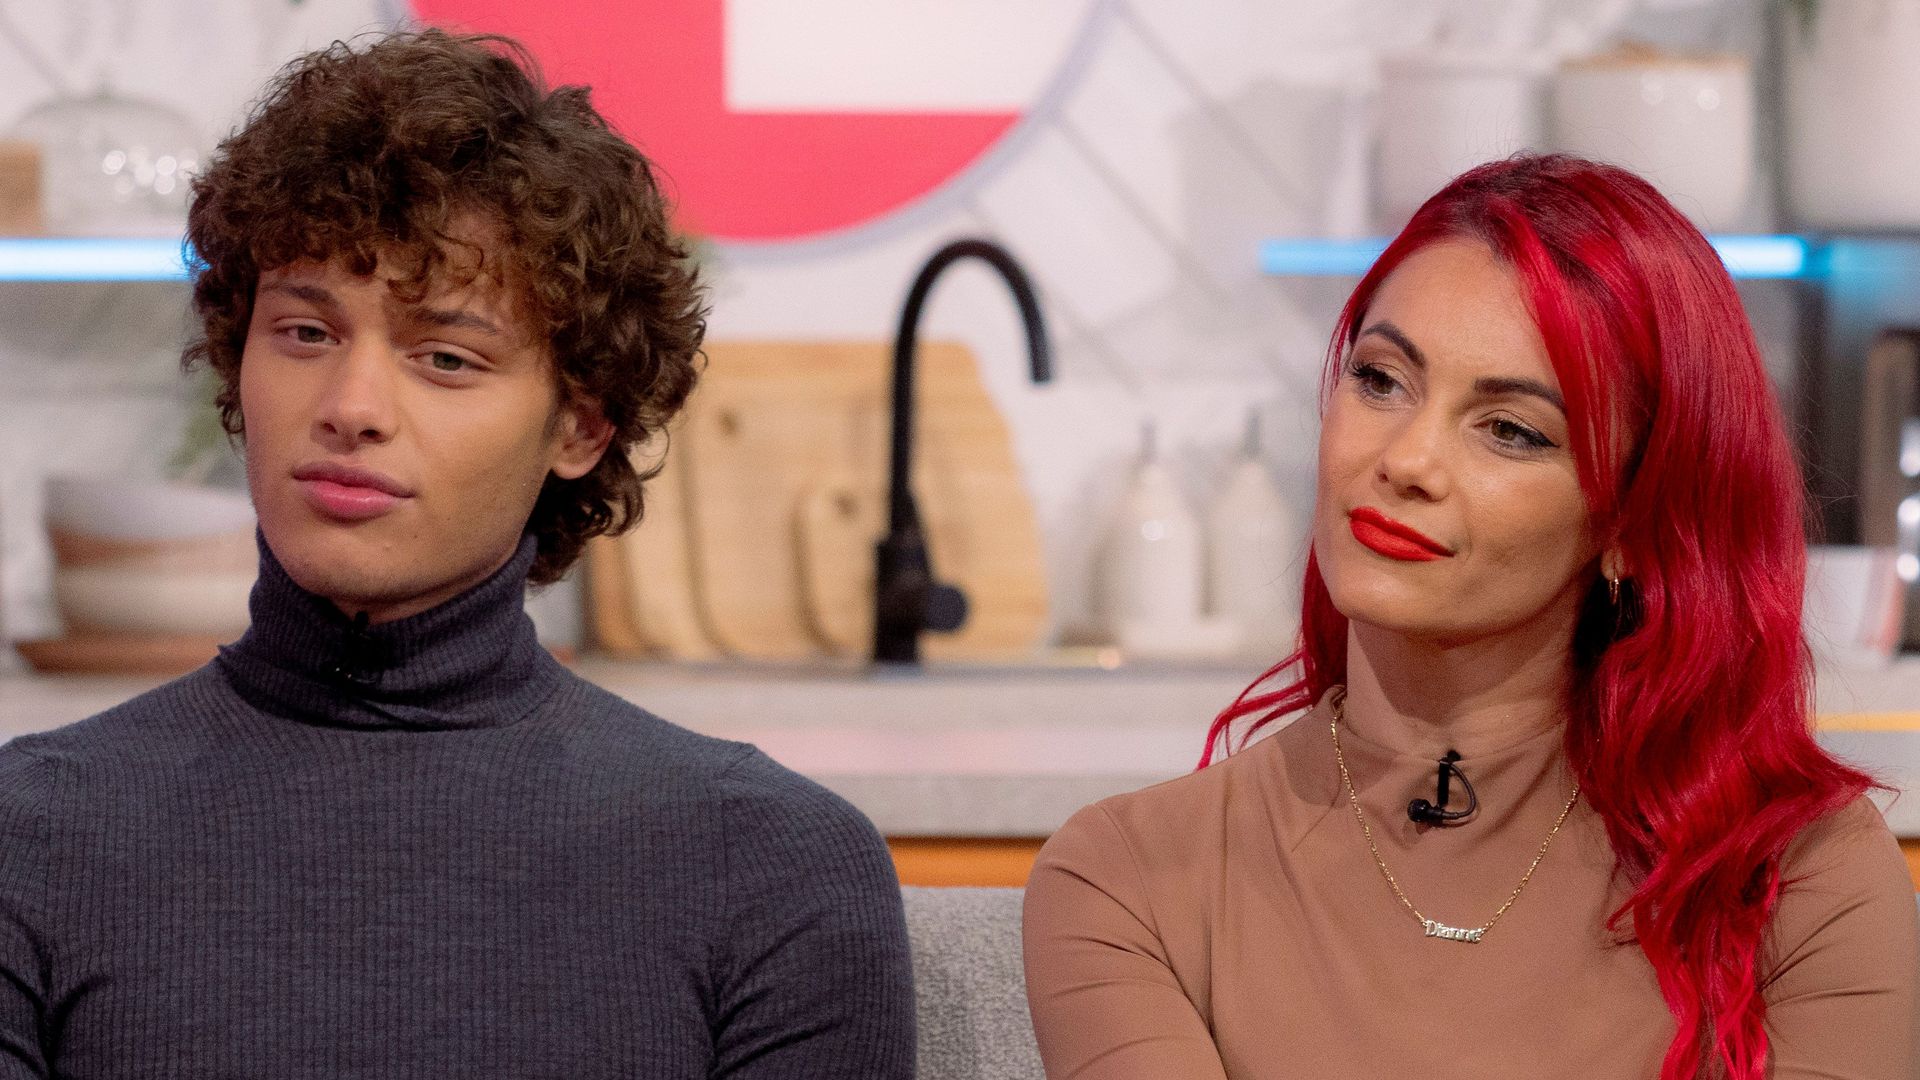 Bobby Brazier and Dianne Buswell on ITV's Lorraine